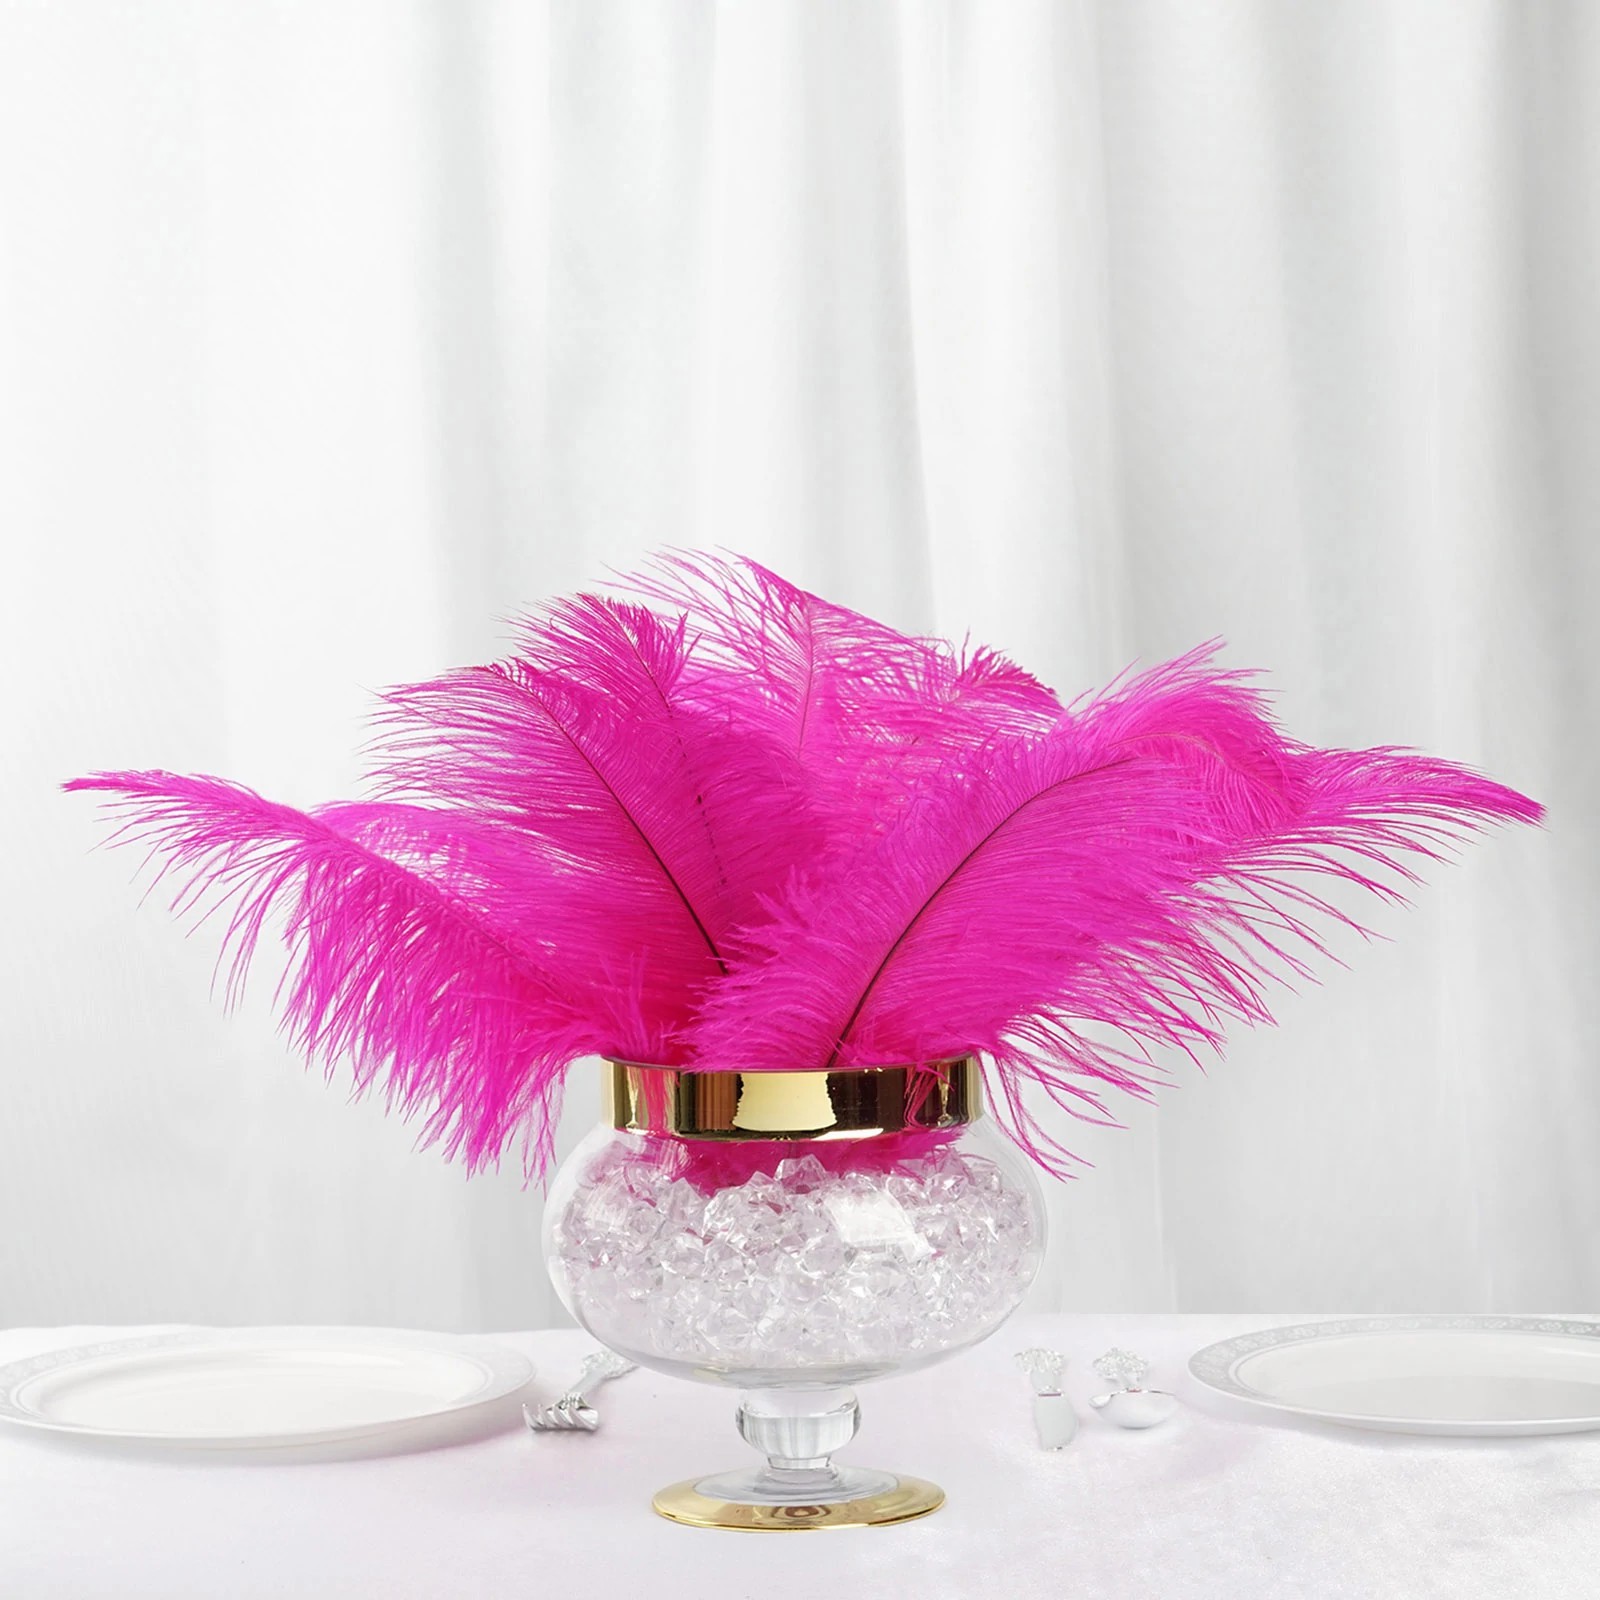 Balsacircle 12 Pcs 13 inch-15 inch Long Authentic Ostrich Feathers - Centerpieces Wedding Party Table Decorations, Pink